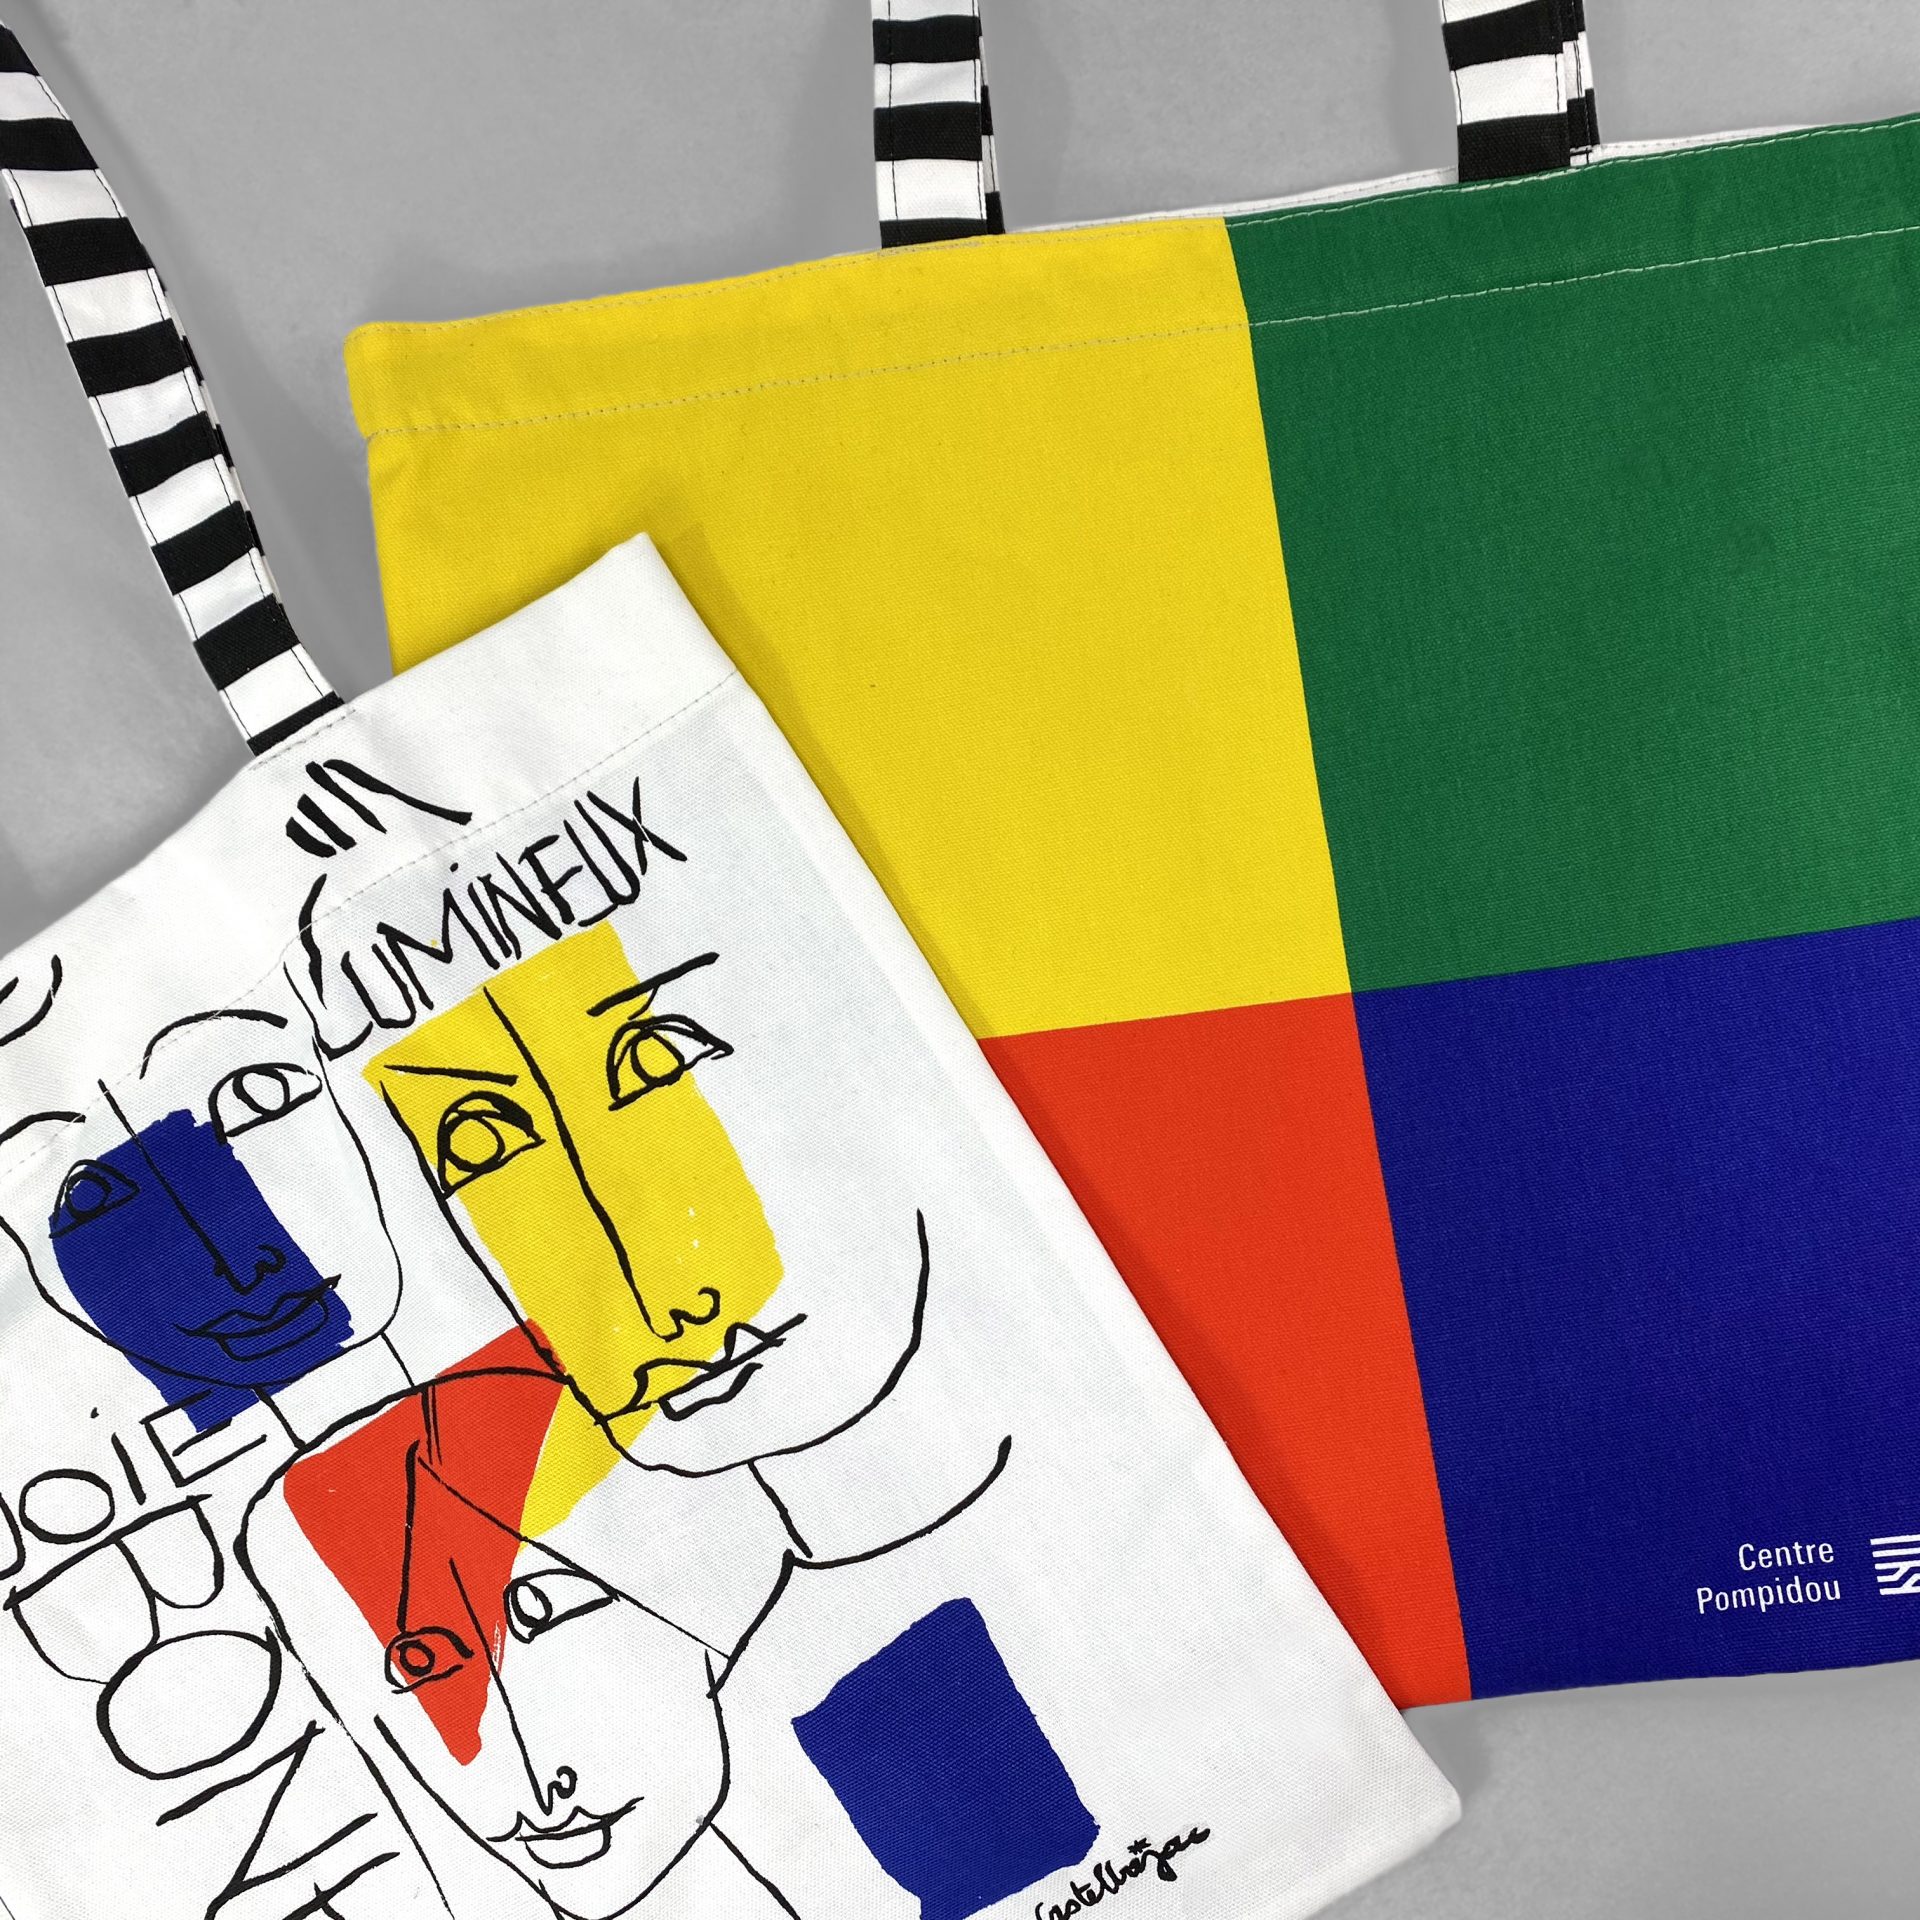 Screen printed tote bags for the new collection for the Pompidou by Jean-Charles de Castelbajac made by Paul Bristow